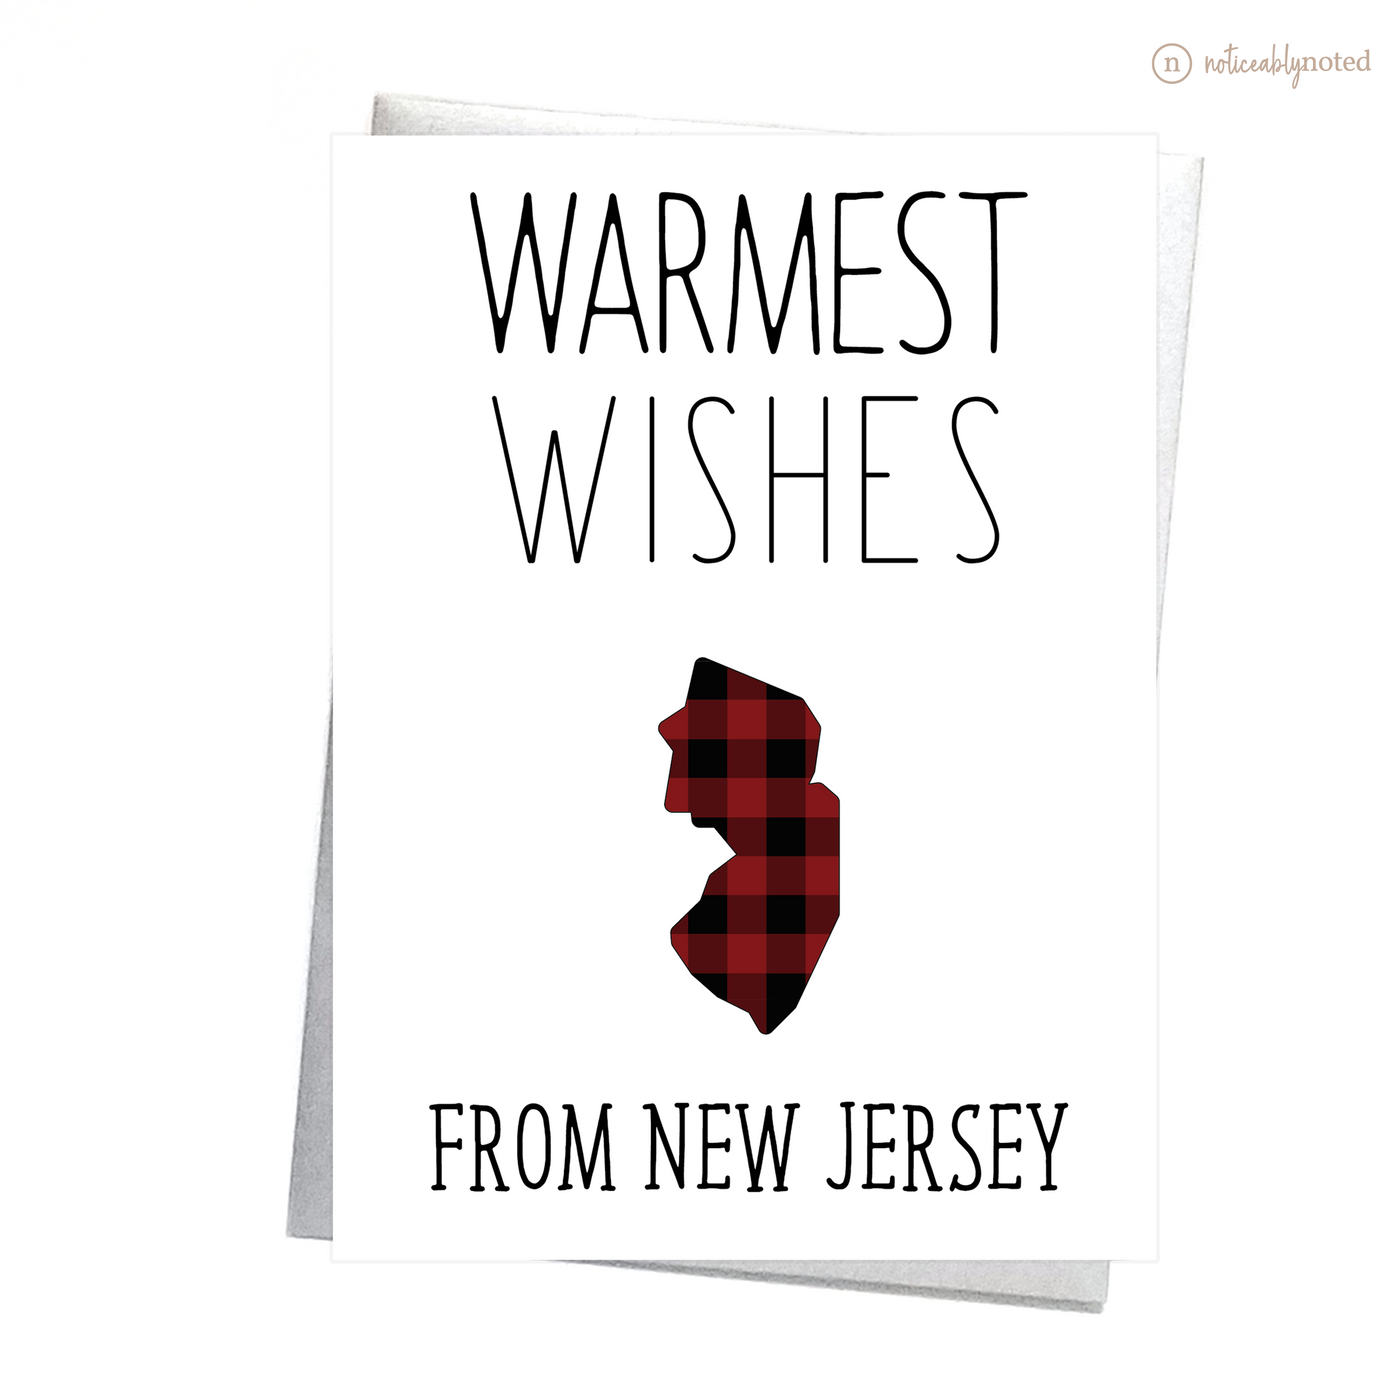 NJ Holiday Greeting Cards | Noticeably Noted